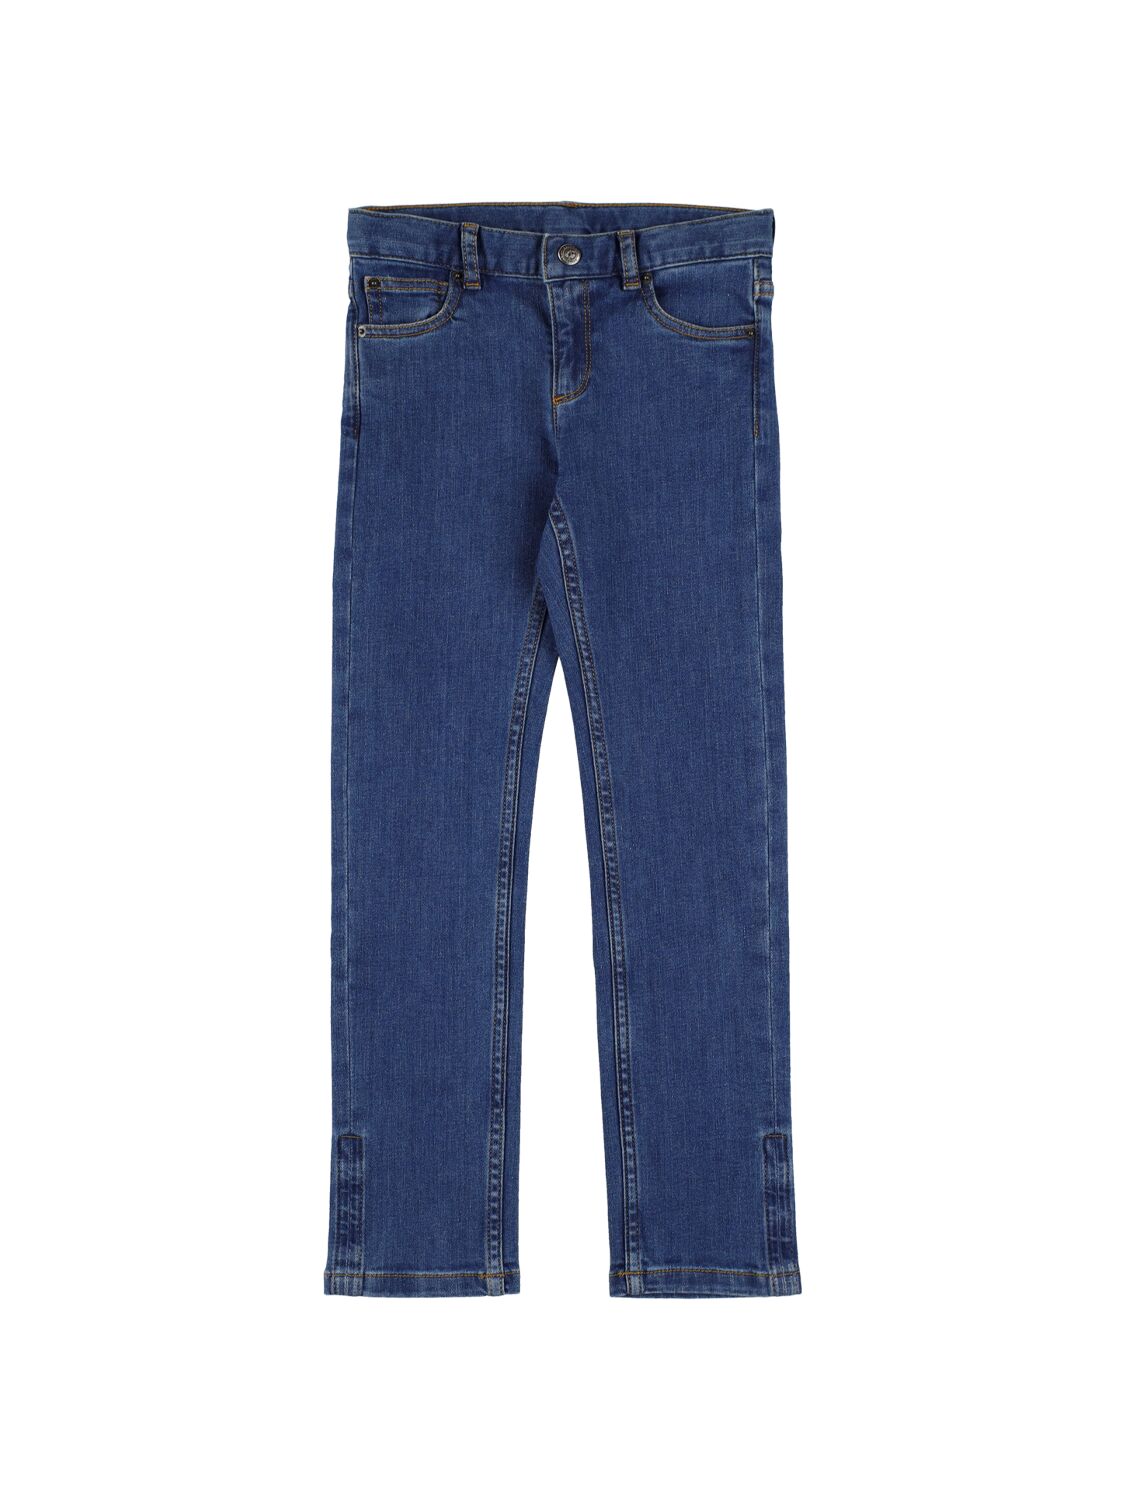 Bonpoint Kids' Stretch Cotton Jeans In Blue